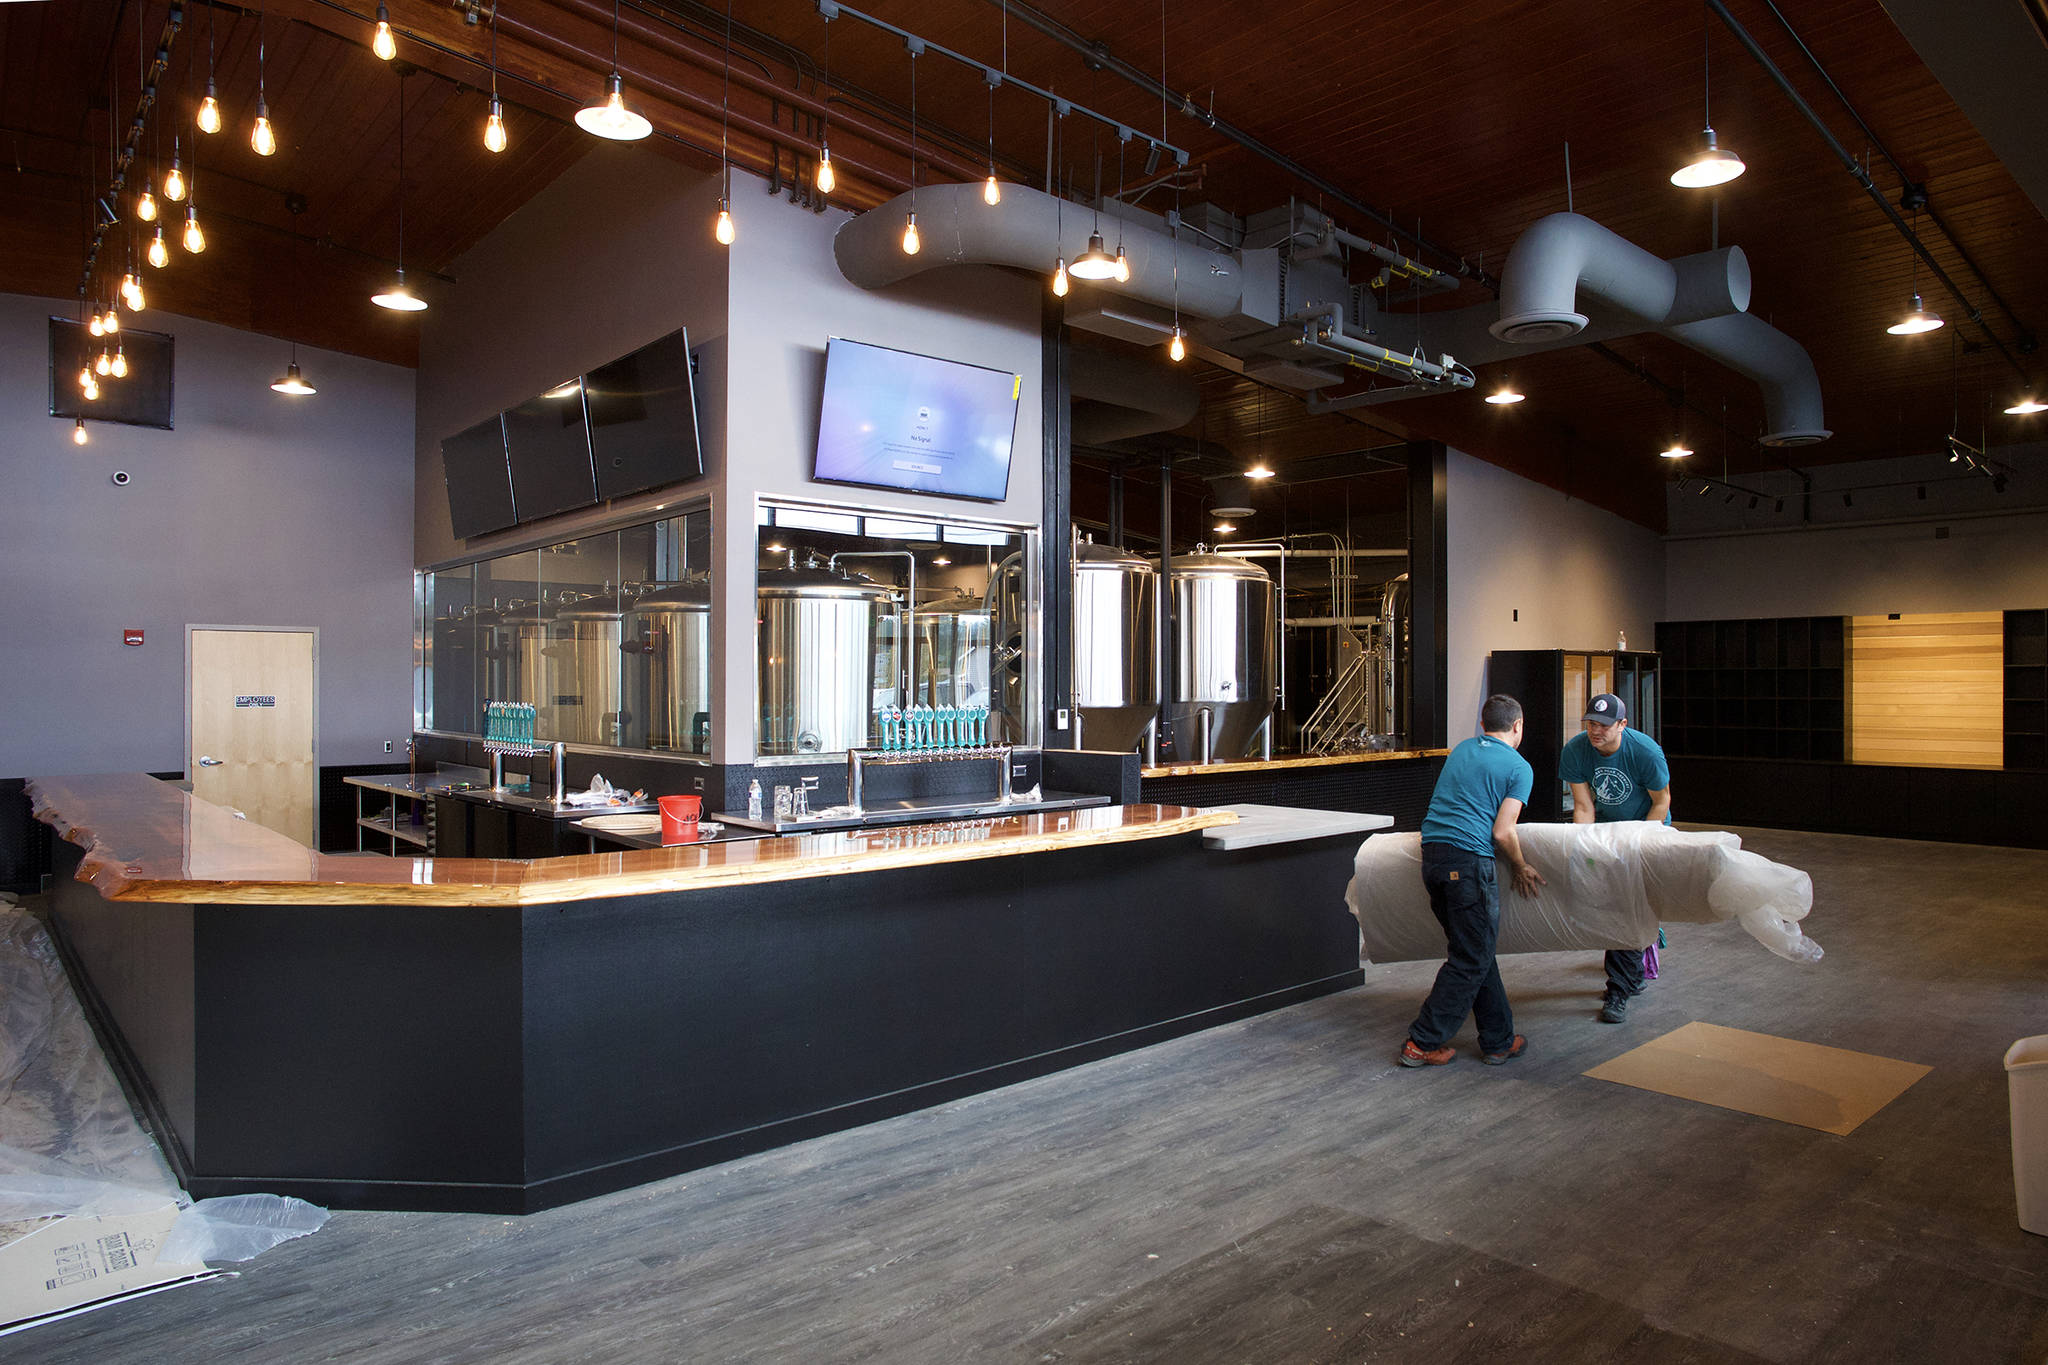 Auke Bay brewery ready for opening